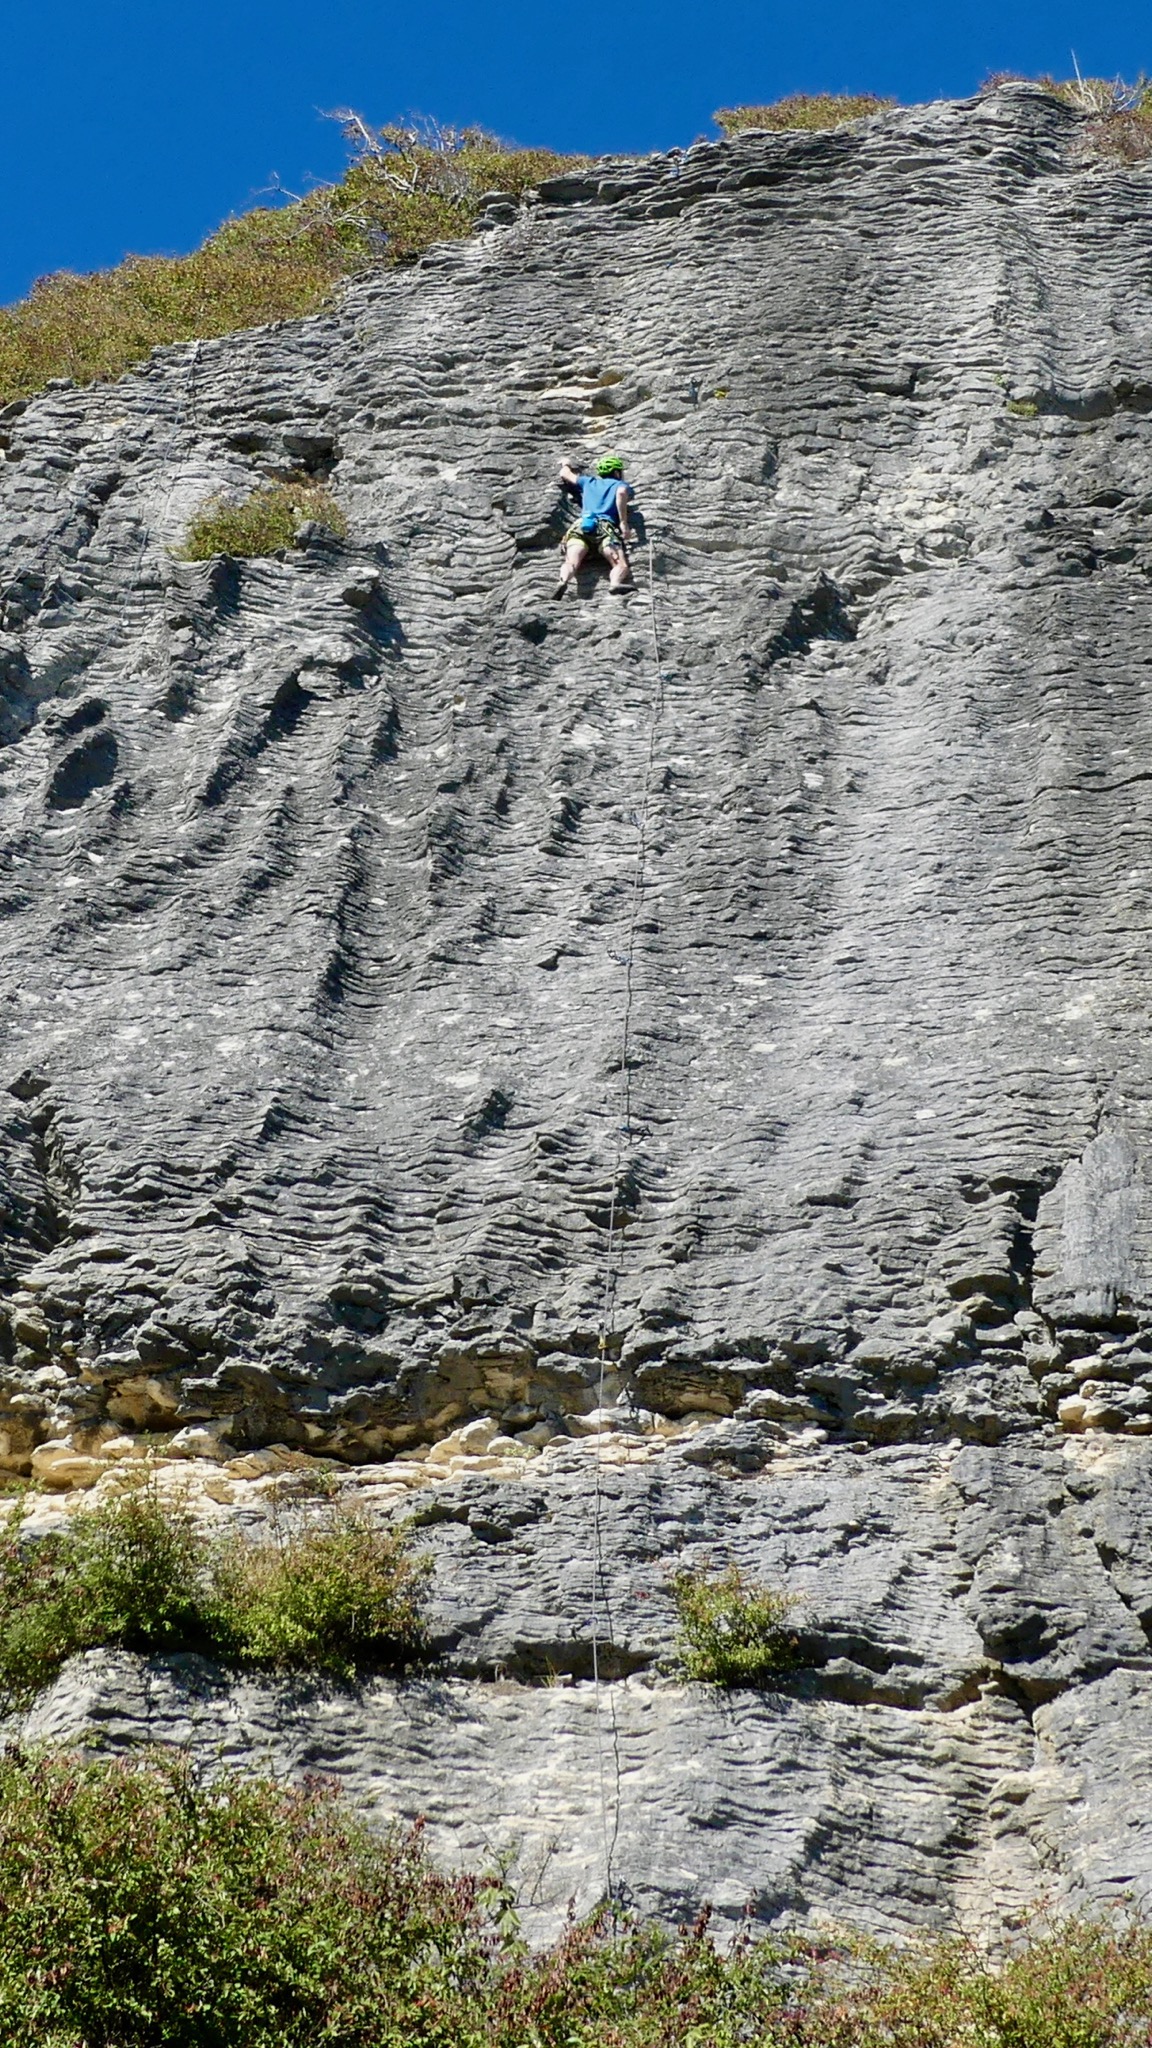 Alexei lead-climbing Marisol (grade 17) route on the Cathedral wall at Pohara.